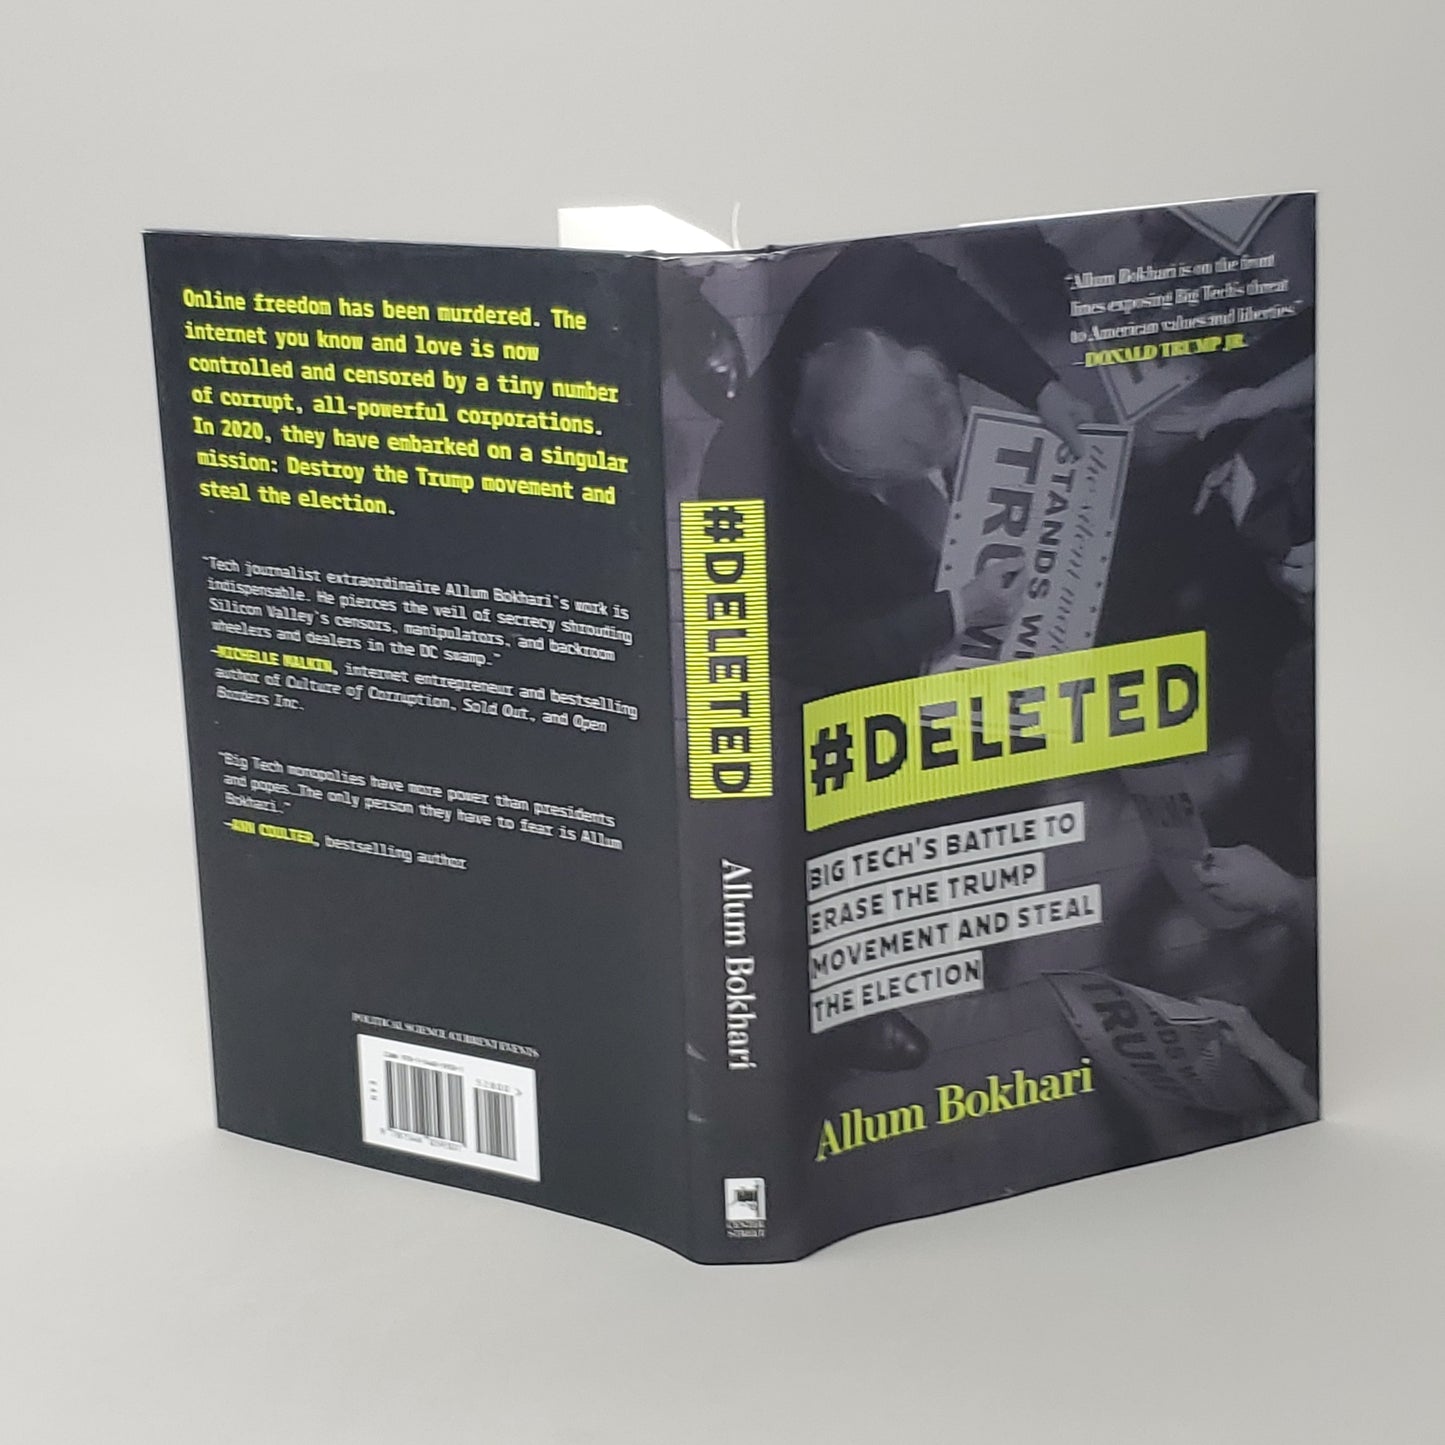 #DELETED Big Tech's Battle To Erase the Trump Movement and Steal the Election by Allum Bokhari Book Hardback (New)